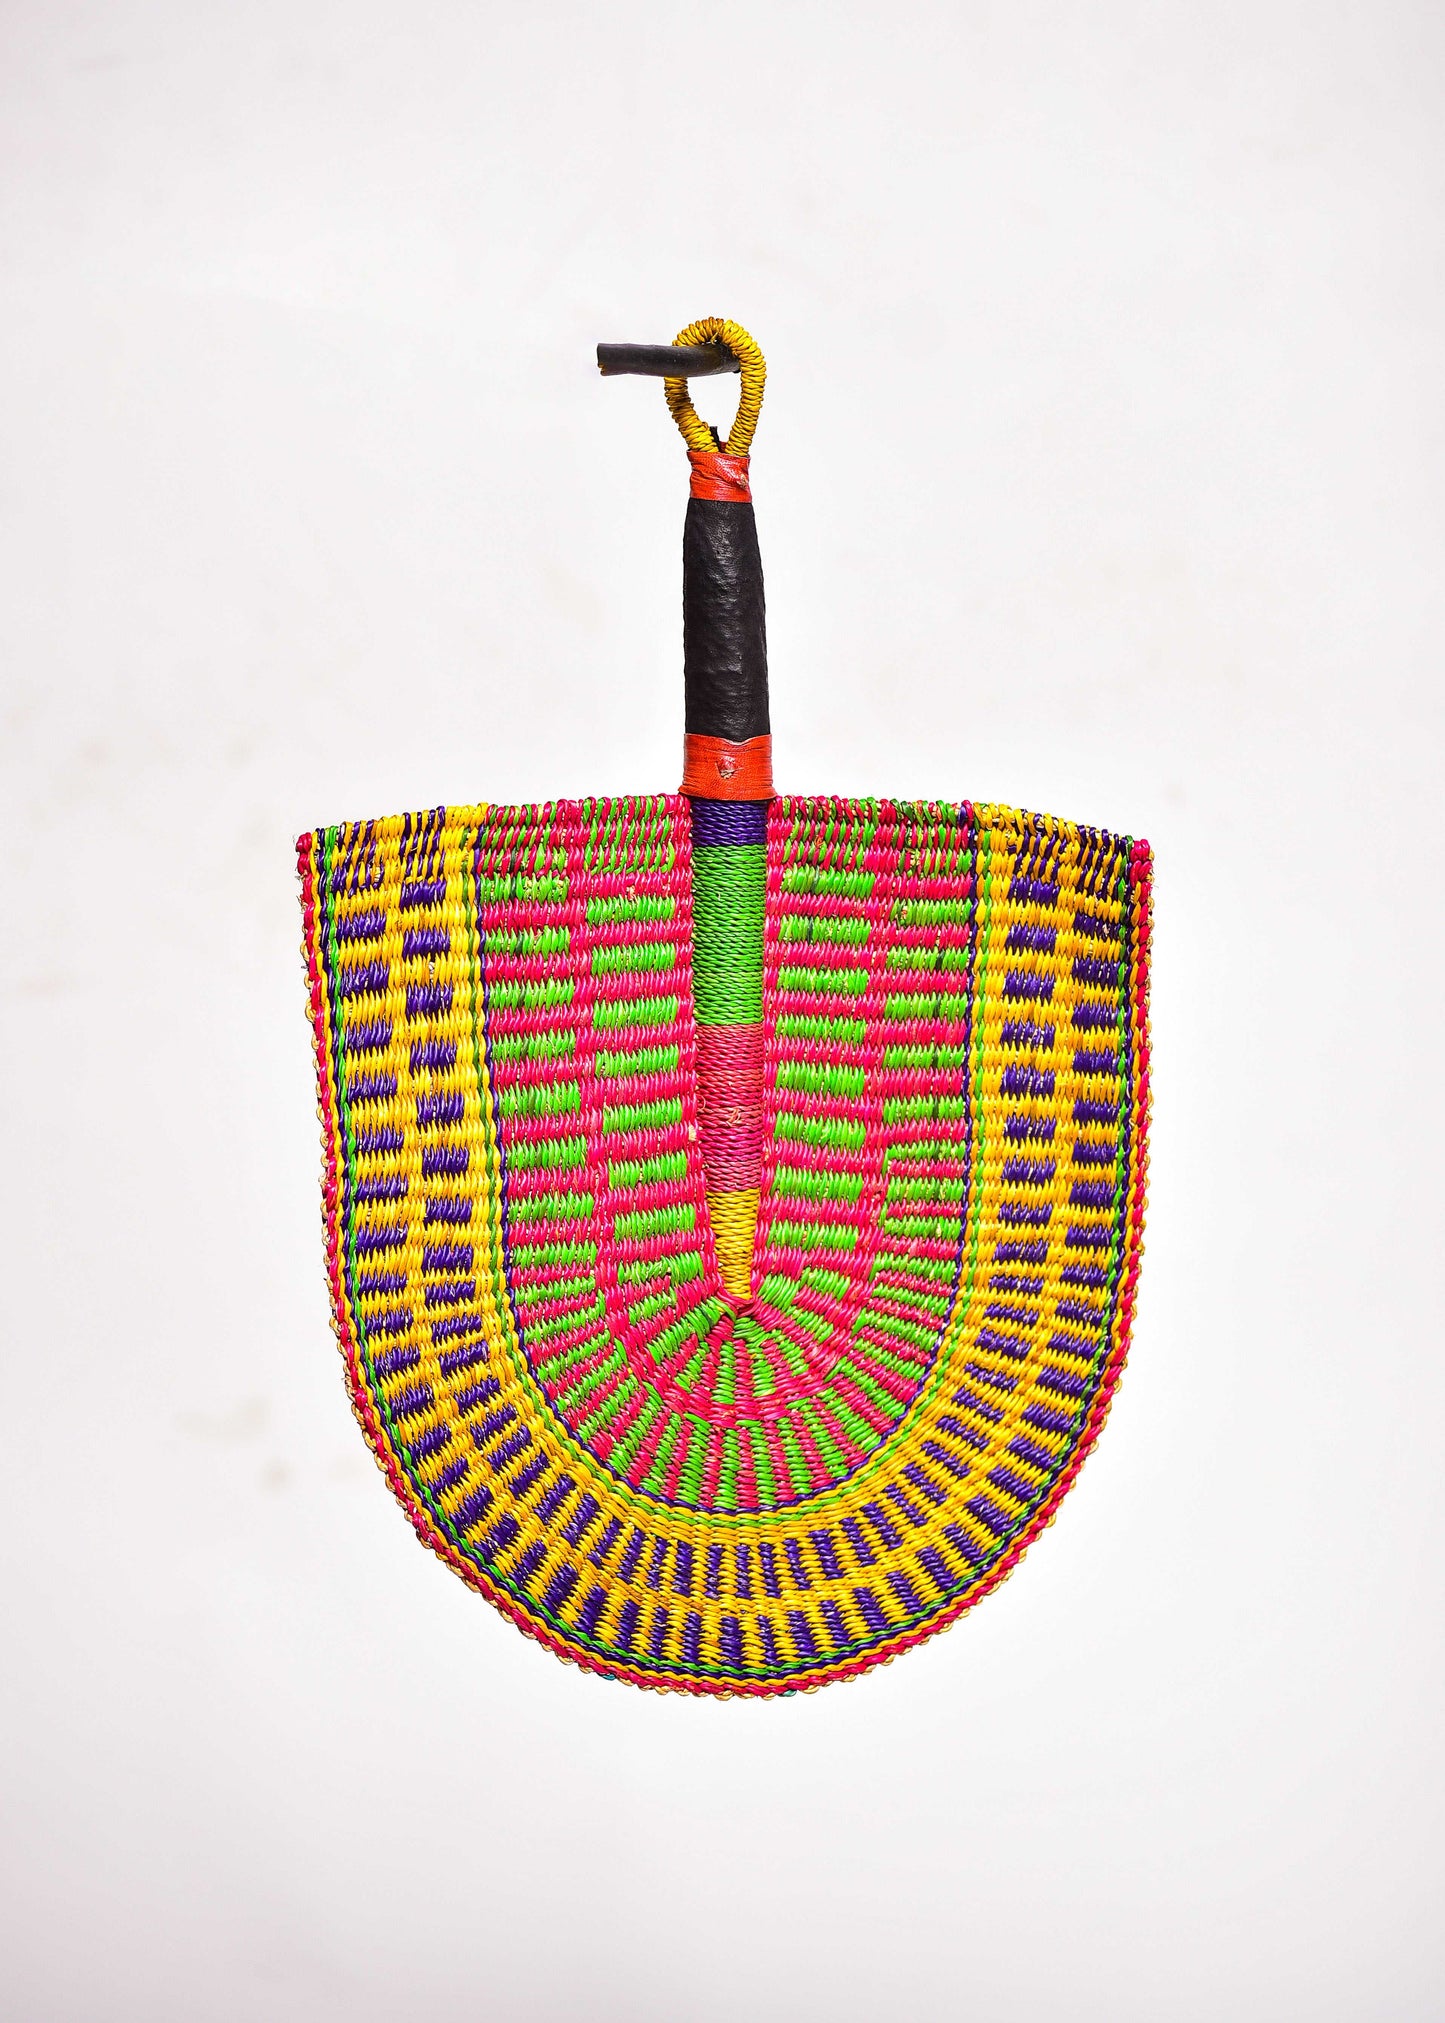 Ned Straw Woven Handfan(Leather Based Handle)